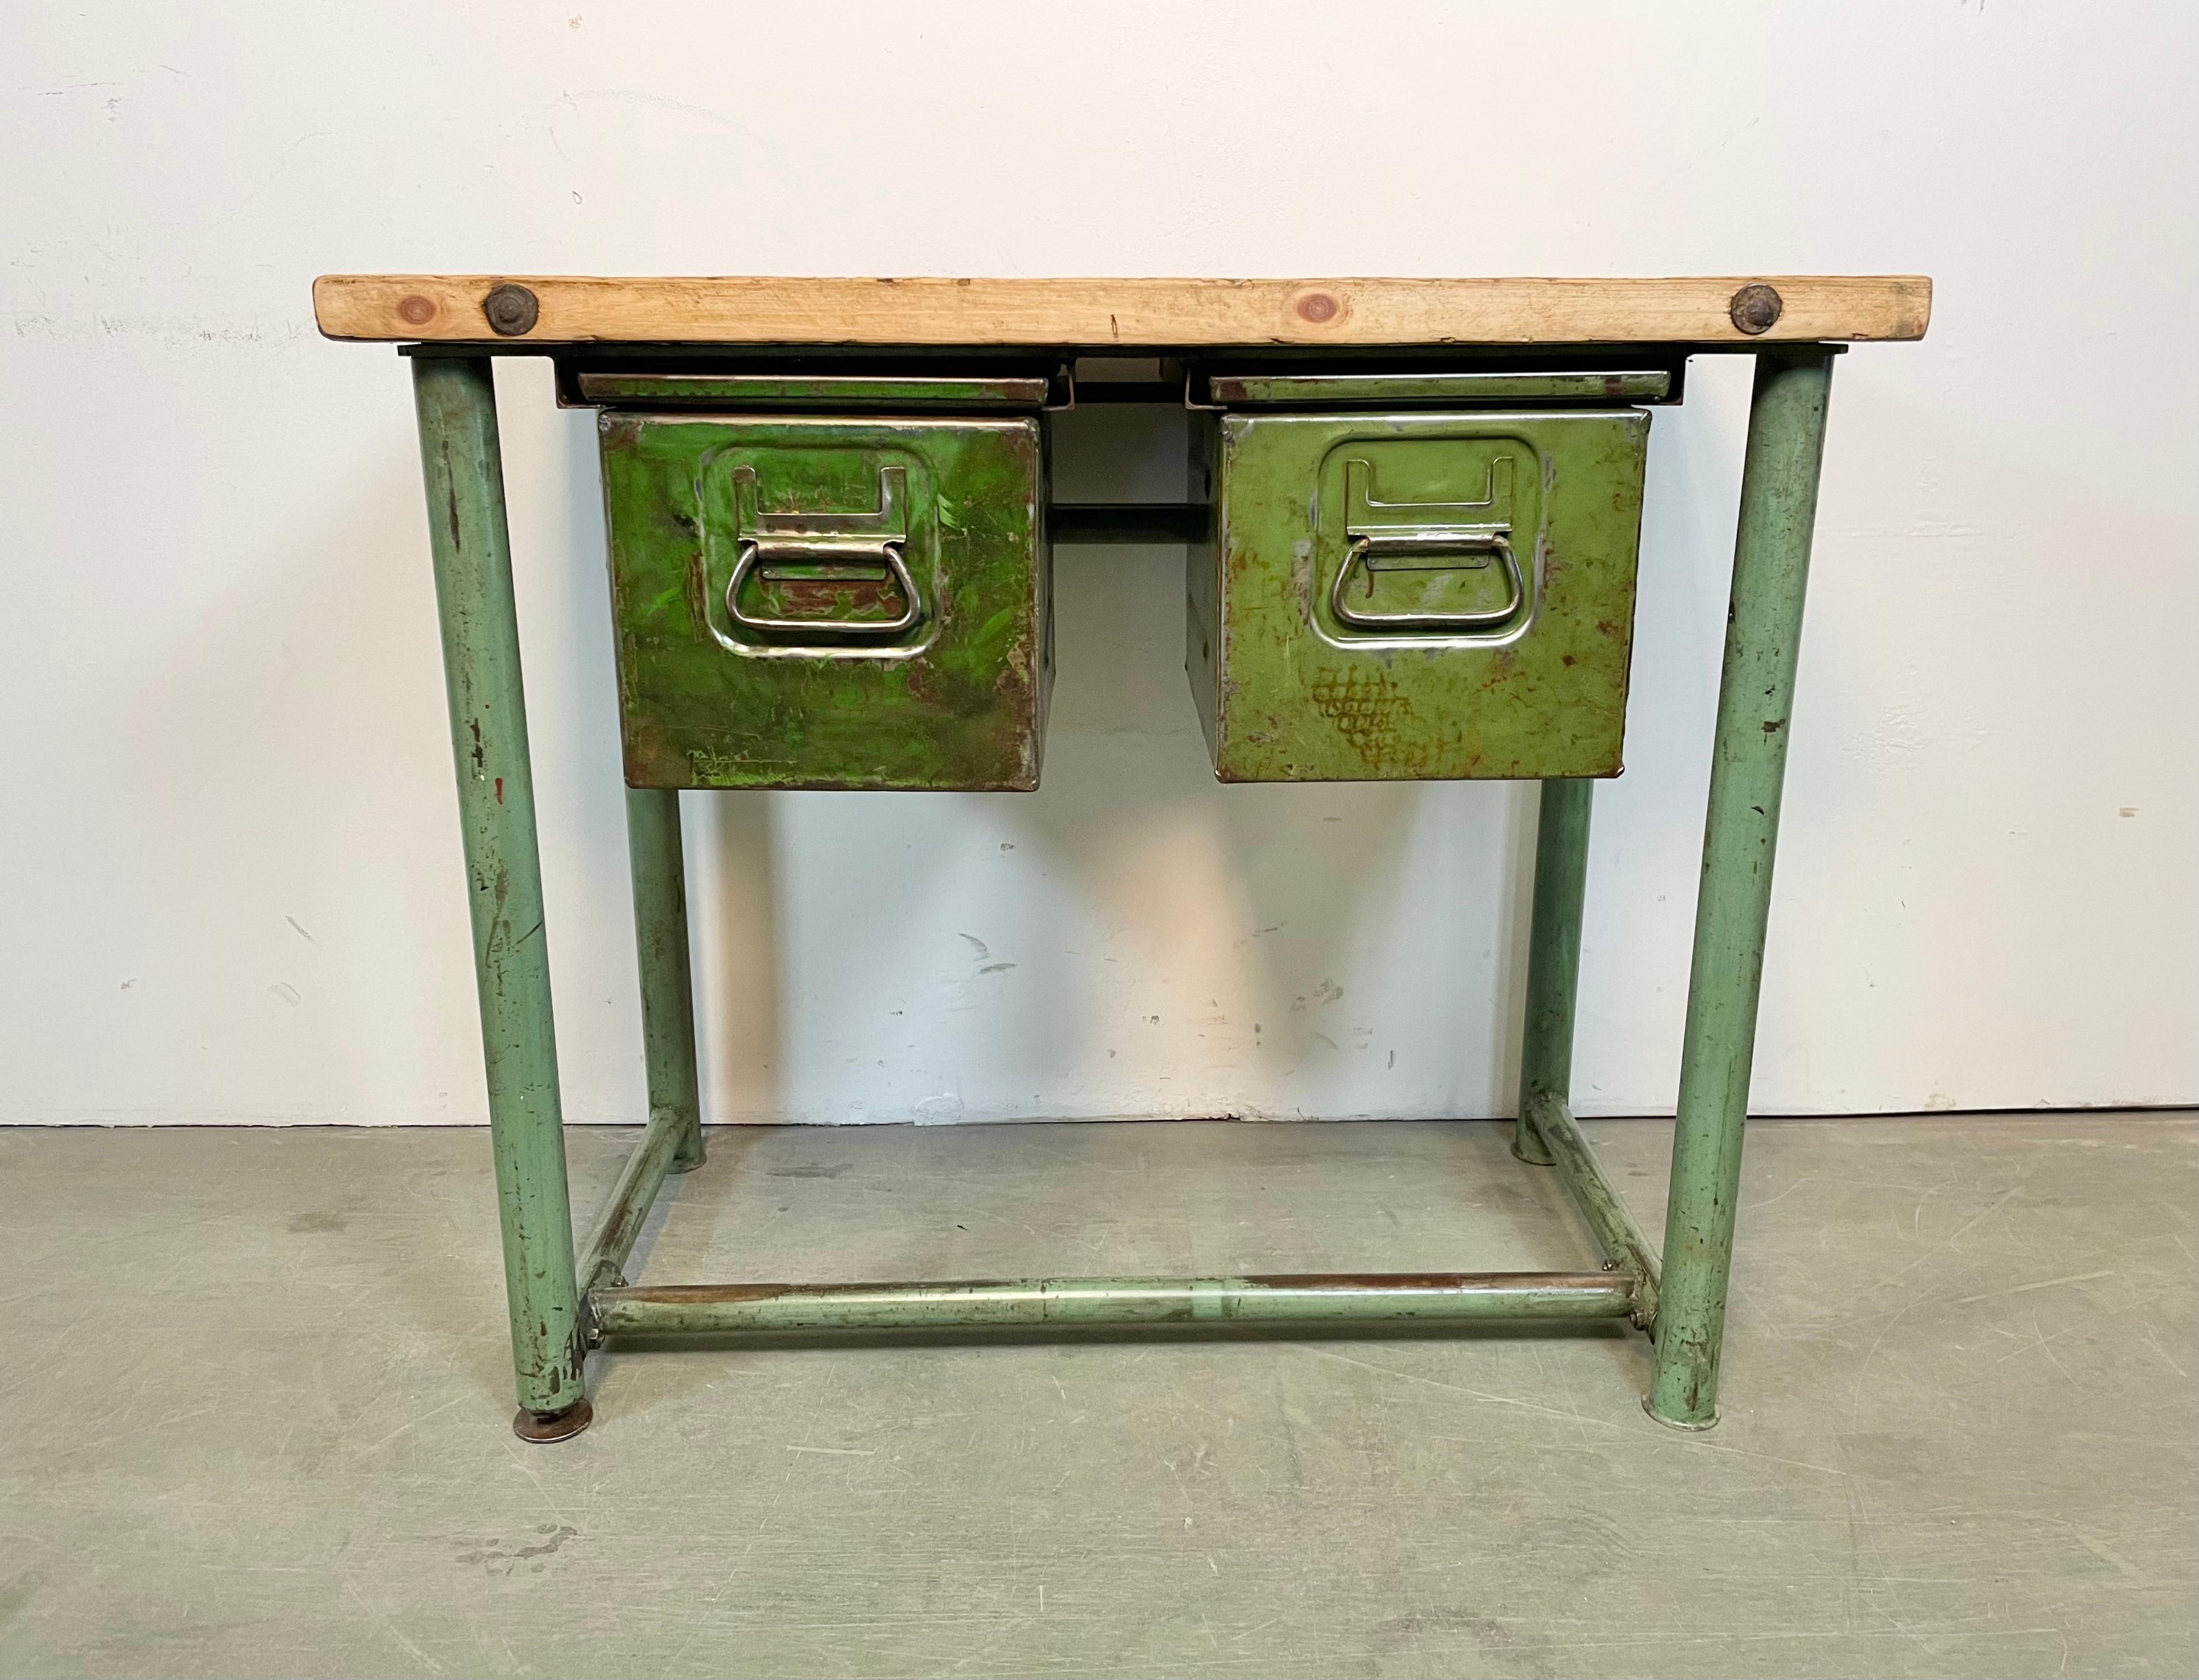 Vintage industrial worktable from the 1960s. It features a green iron construction, solid wooden plate and two iron drawers. Weight: 40 kg.